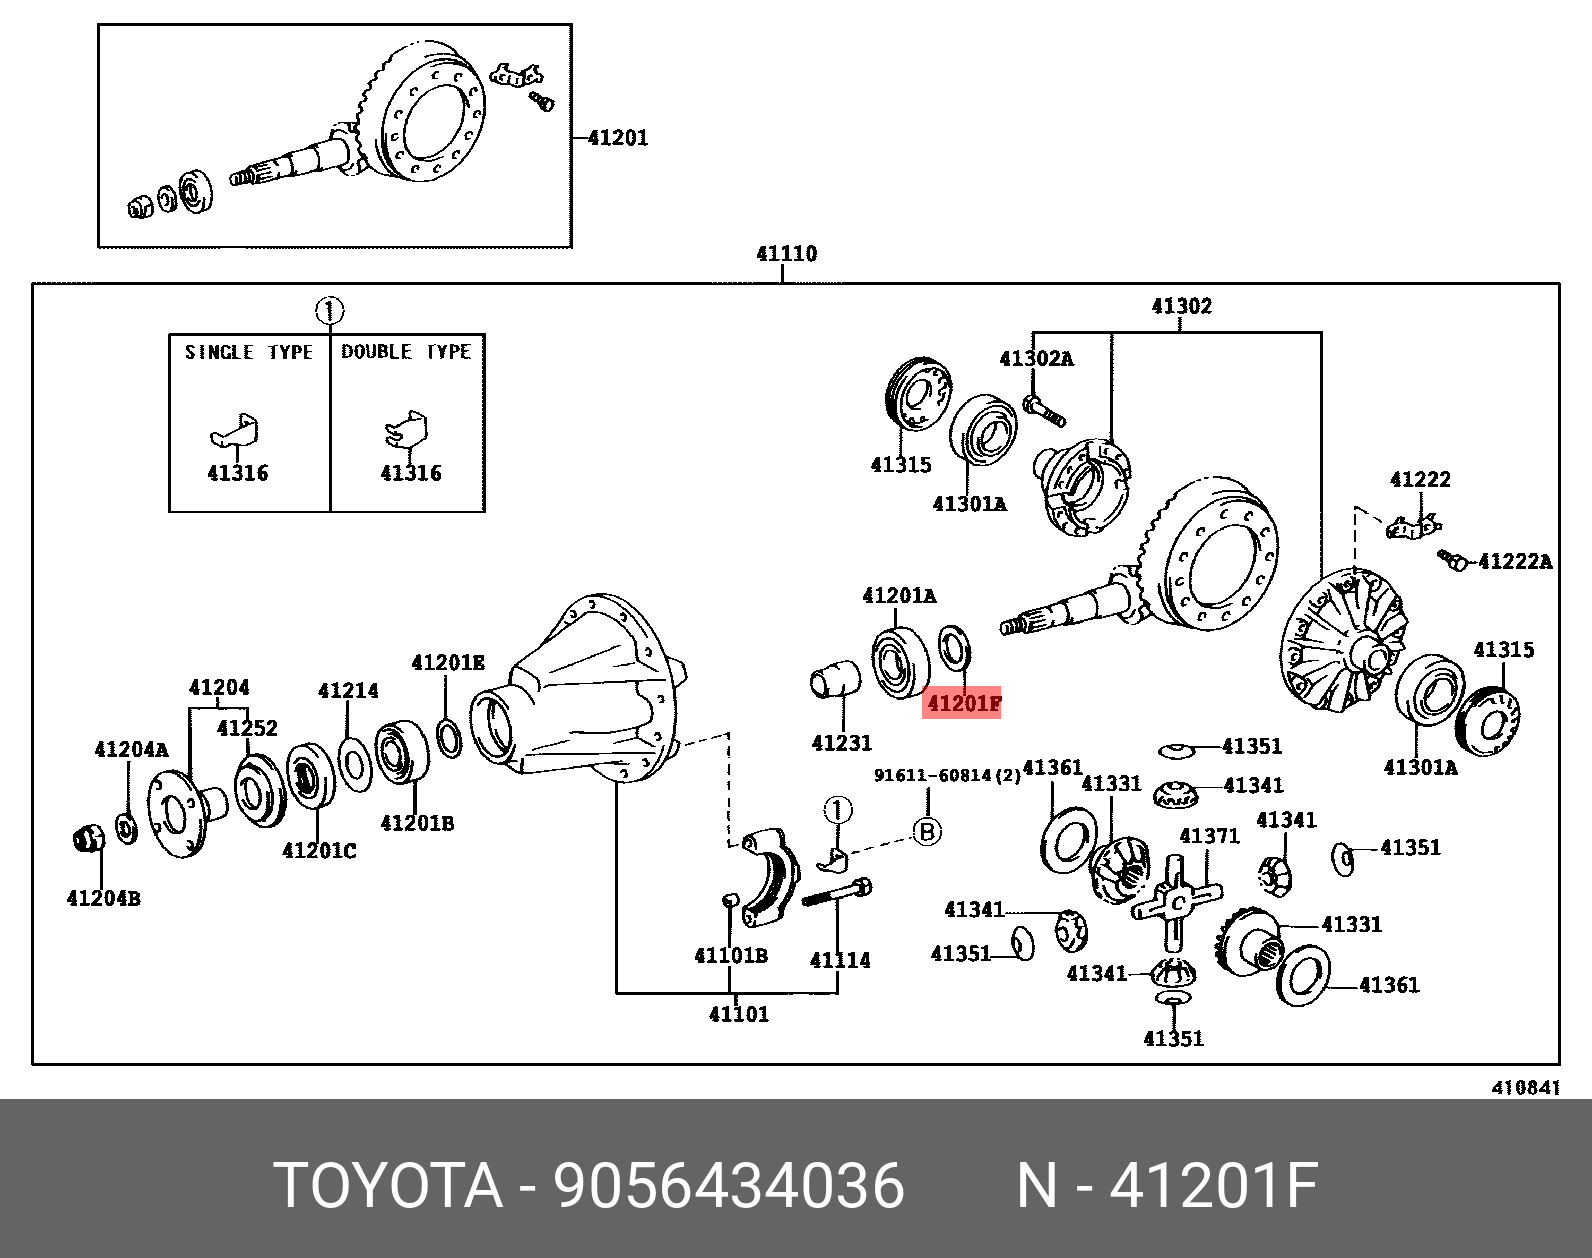 9056434036, HARRIER 199712-200302, ACU1#, MCU1#, SXU1#, WASHER, PLATE (FOR REAR DIFFERENTIAL DRIVE PINION)